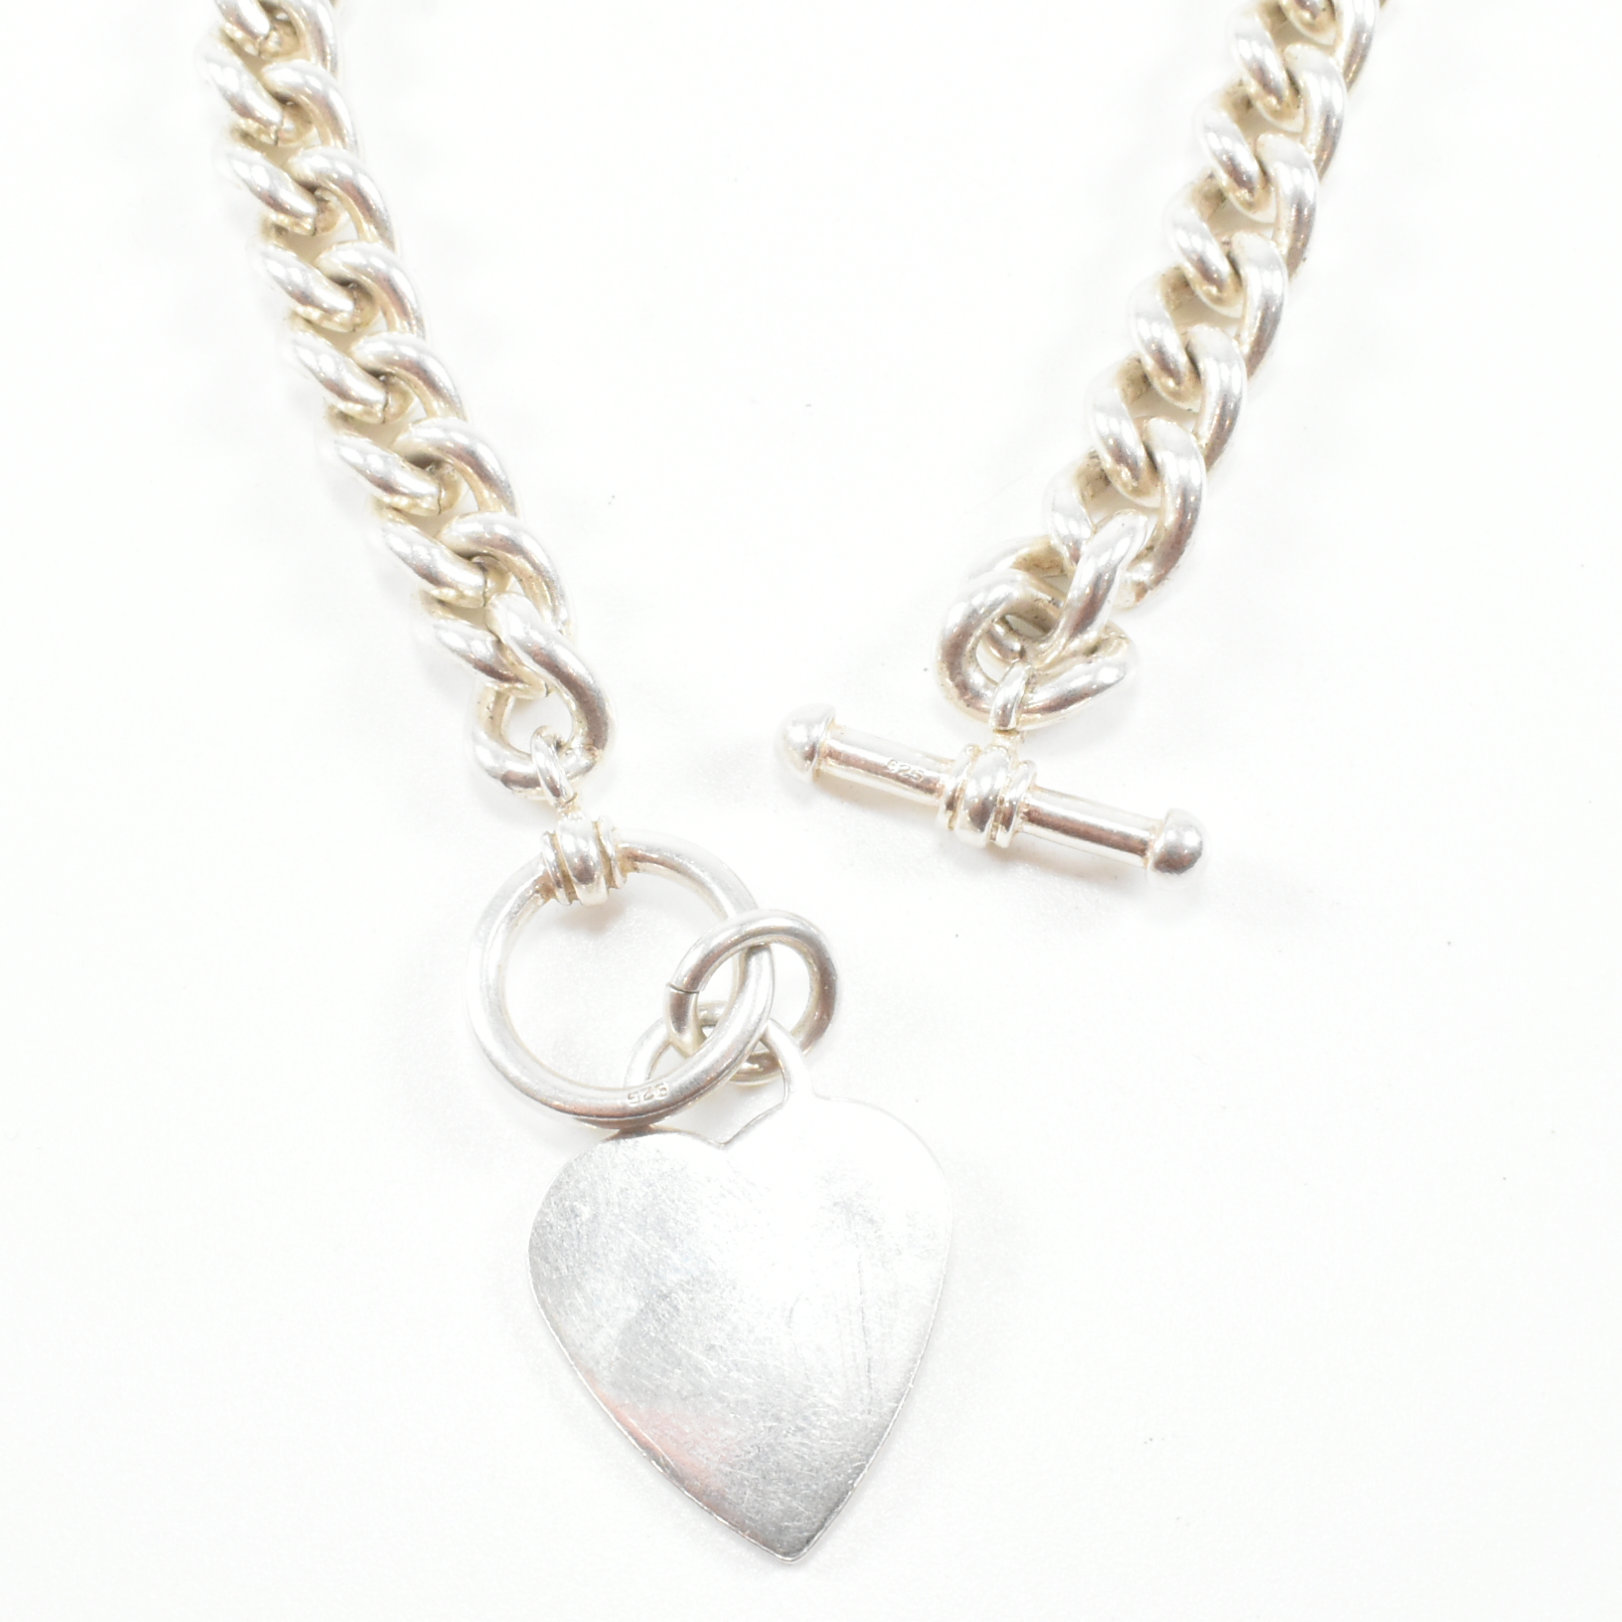 CONTEMPORARY 925 SILVER T BAR CURB LINK CHAIN & HEART PENDANT - Image 5 of 5